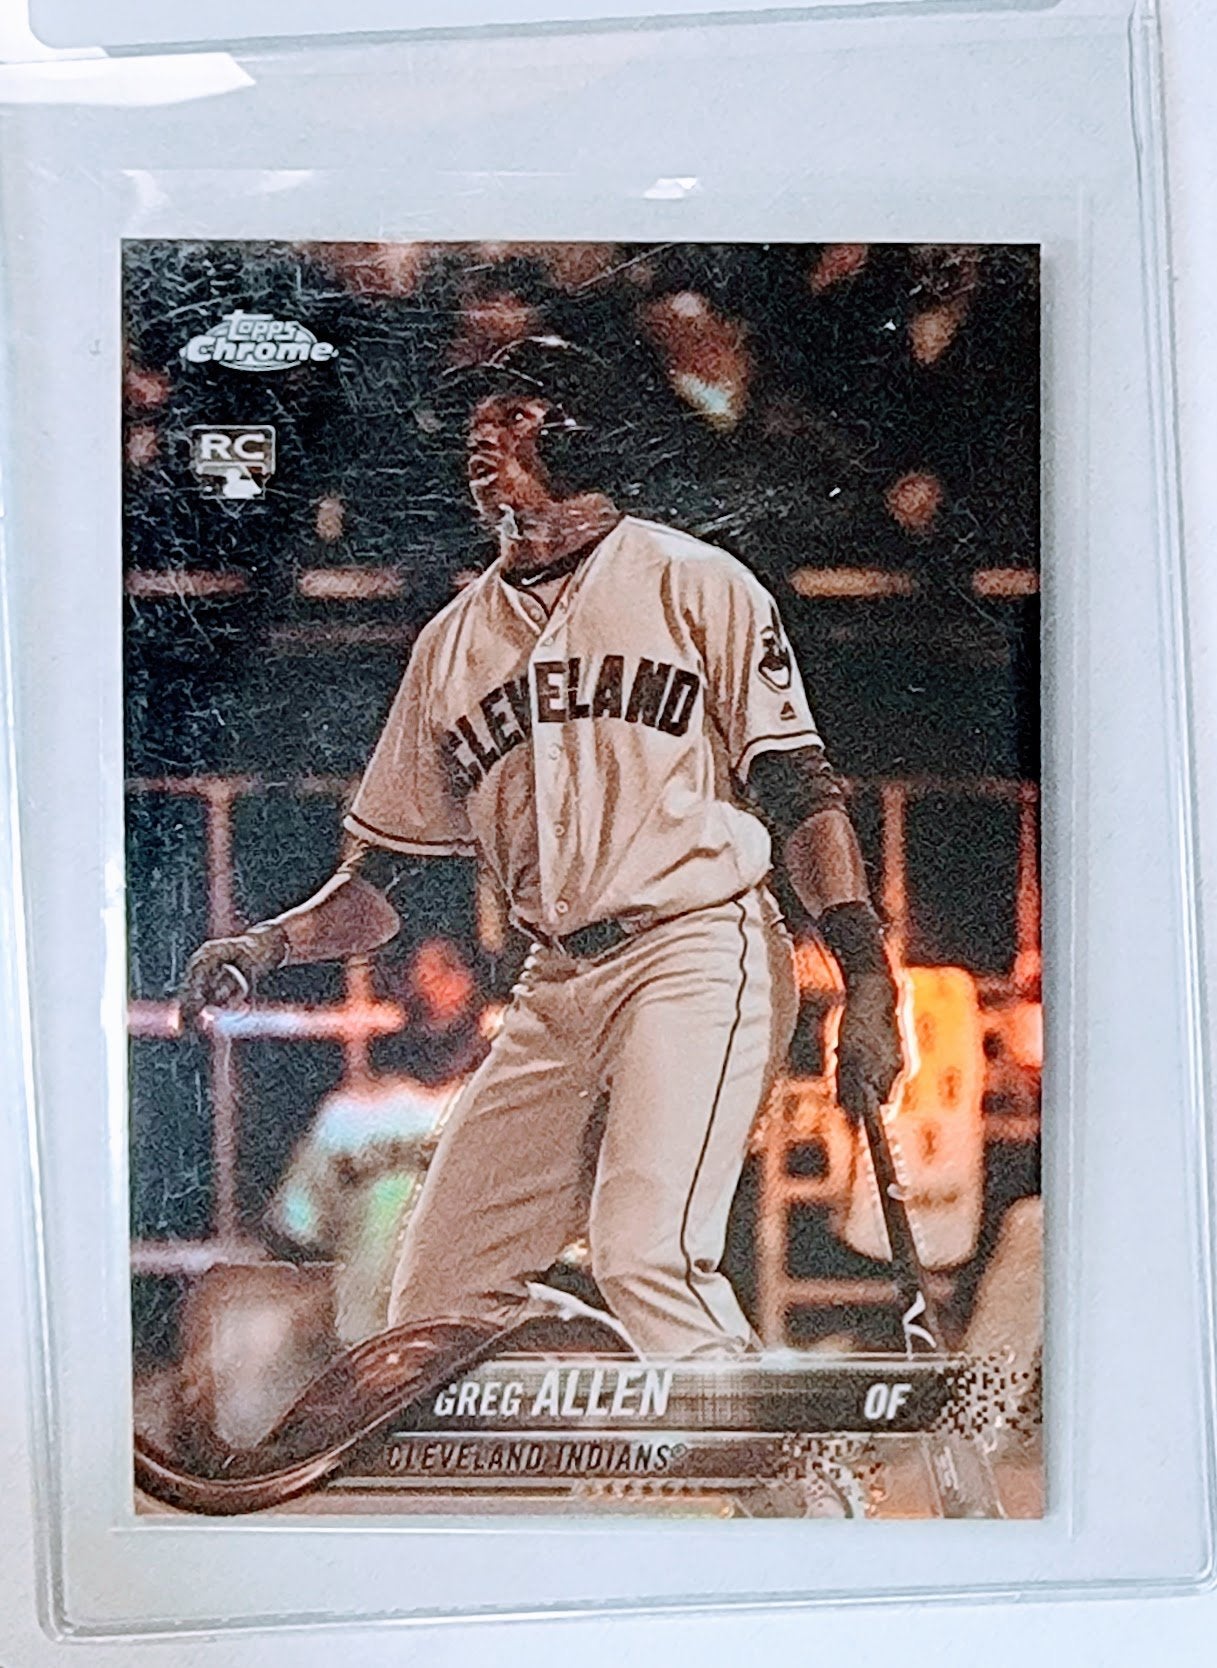 2018 Topps Chrome Greg Allen Rookie Sepia Refractor Baseball Trading Card TPTV simple Xclusive Collectibles   